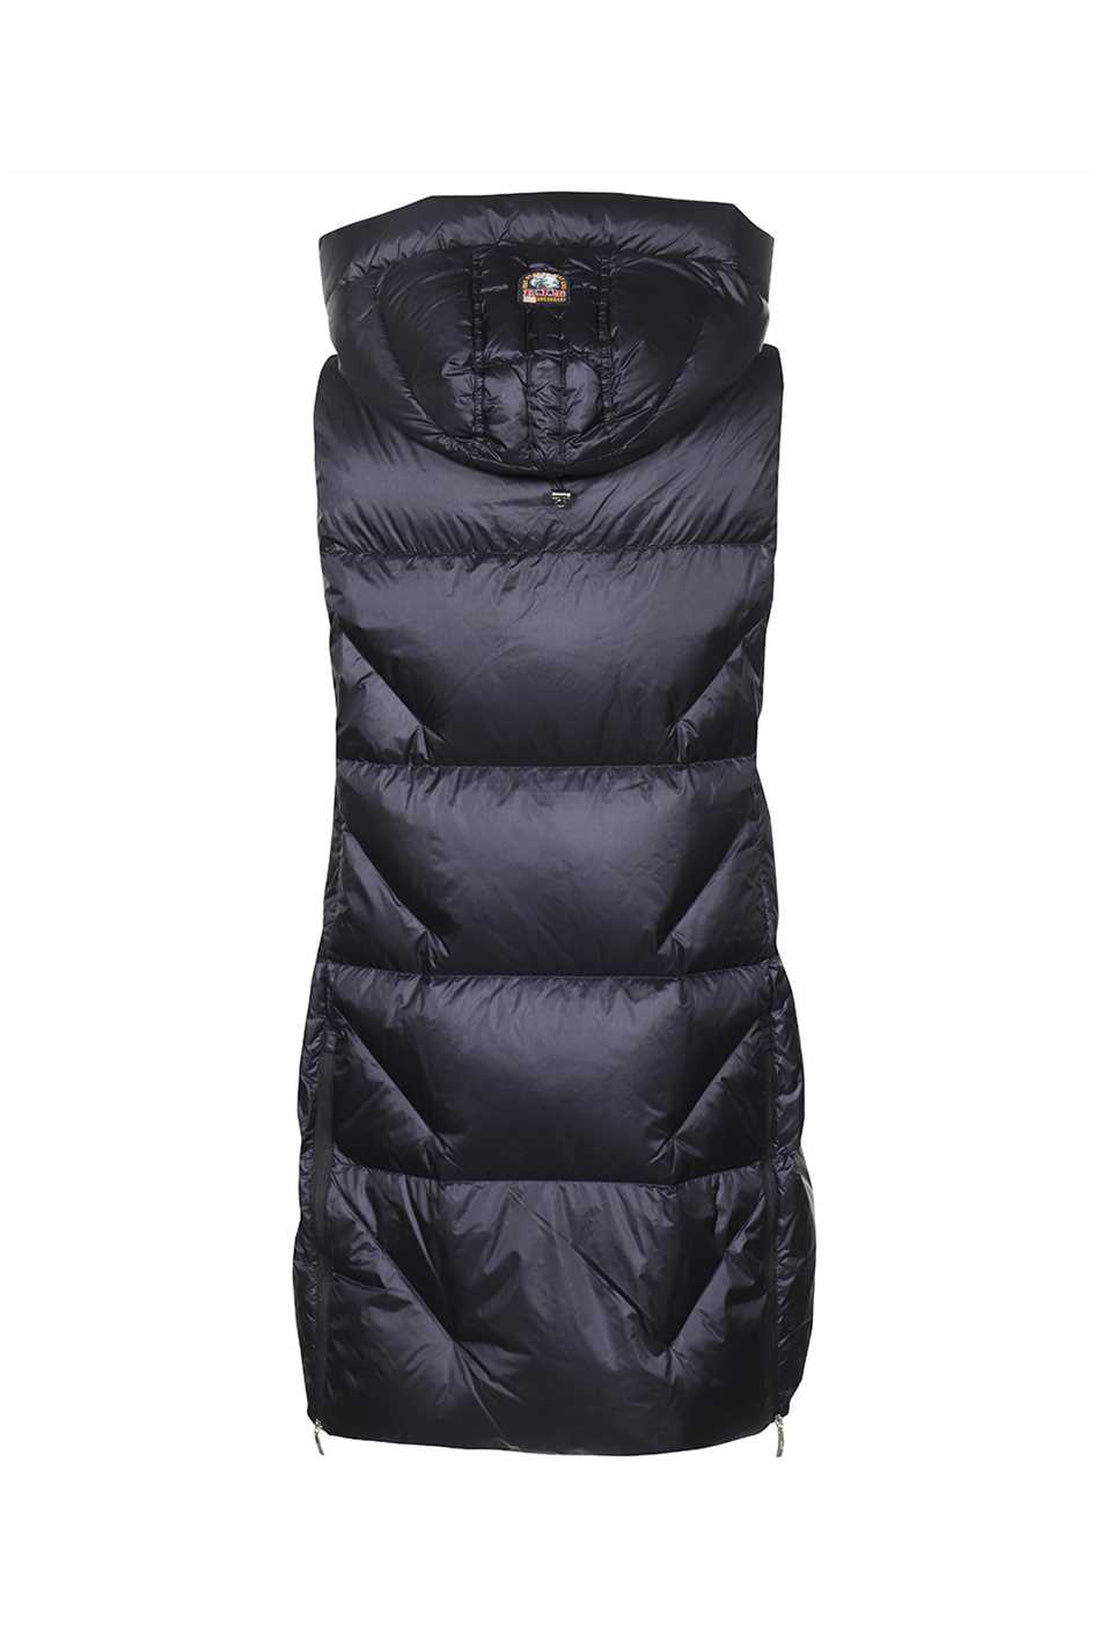 Parajumpers-OUTLET-SALE-Zuly bodywarmer jacket-ARCHIVIST